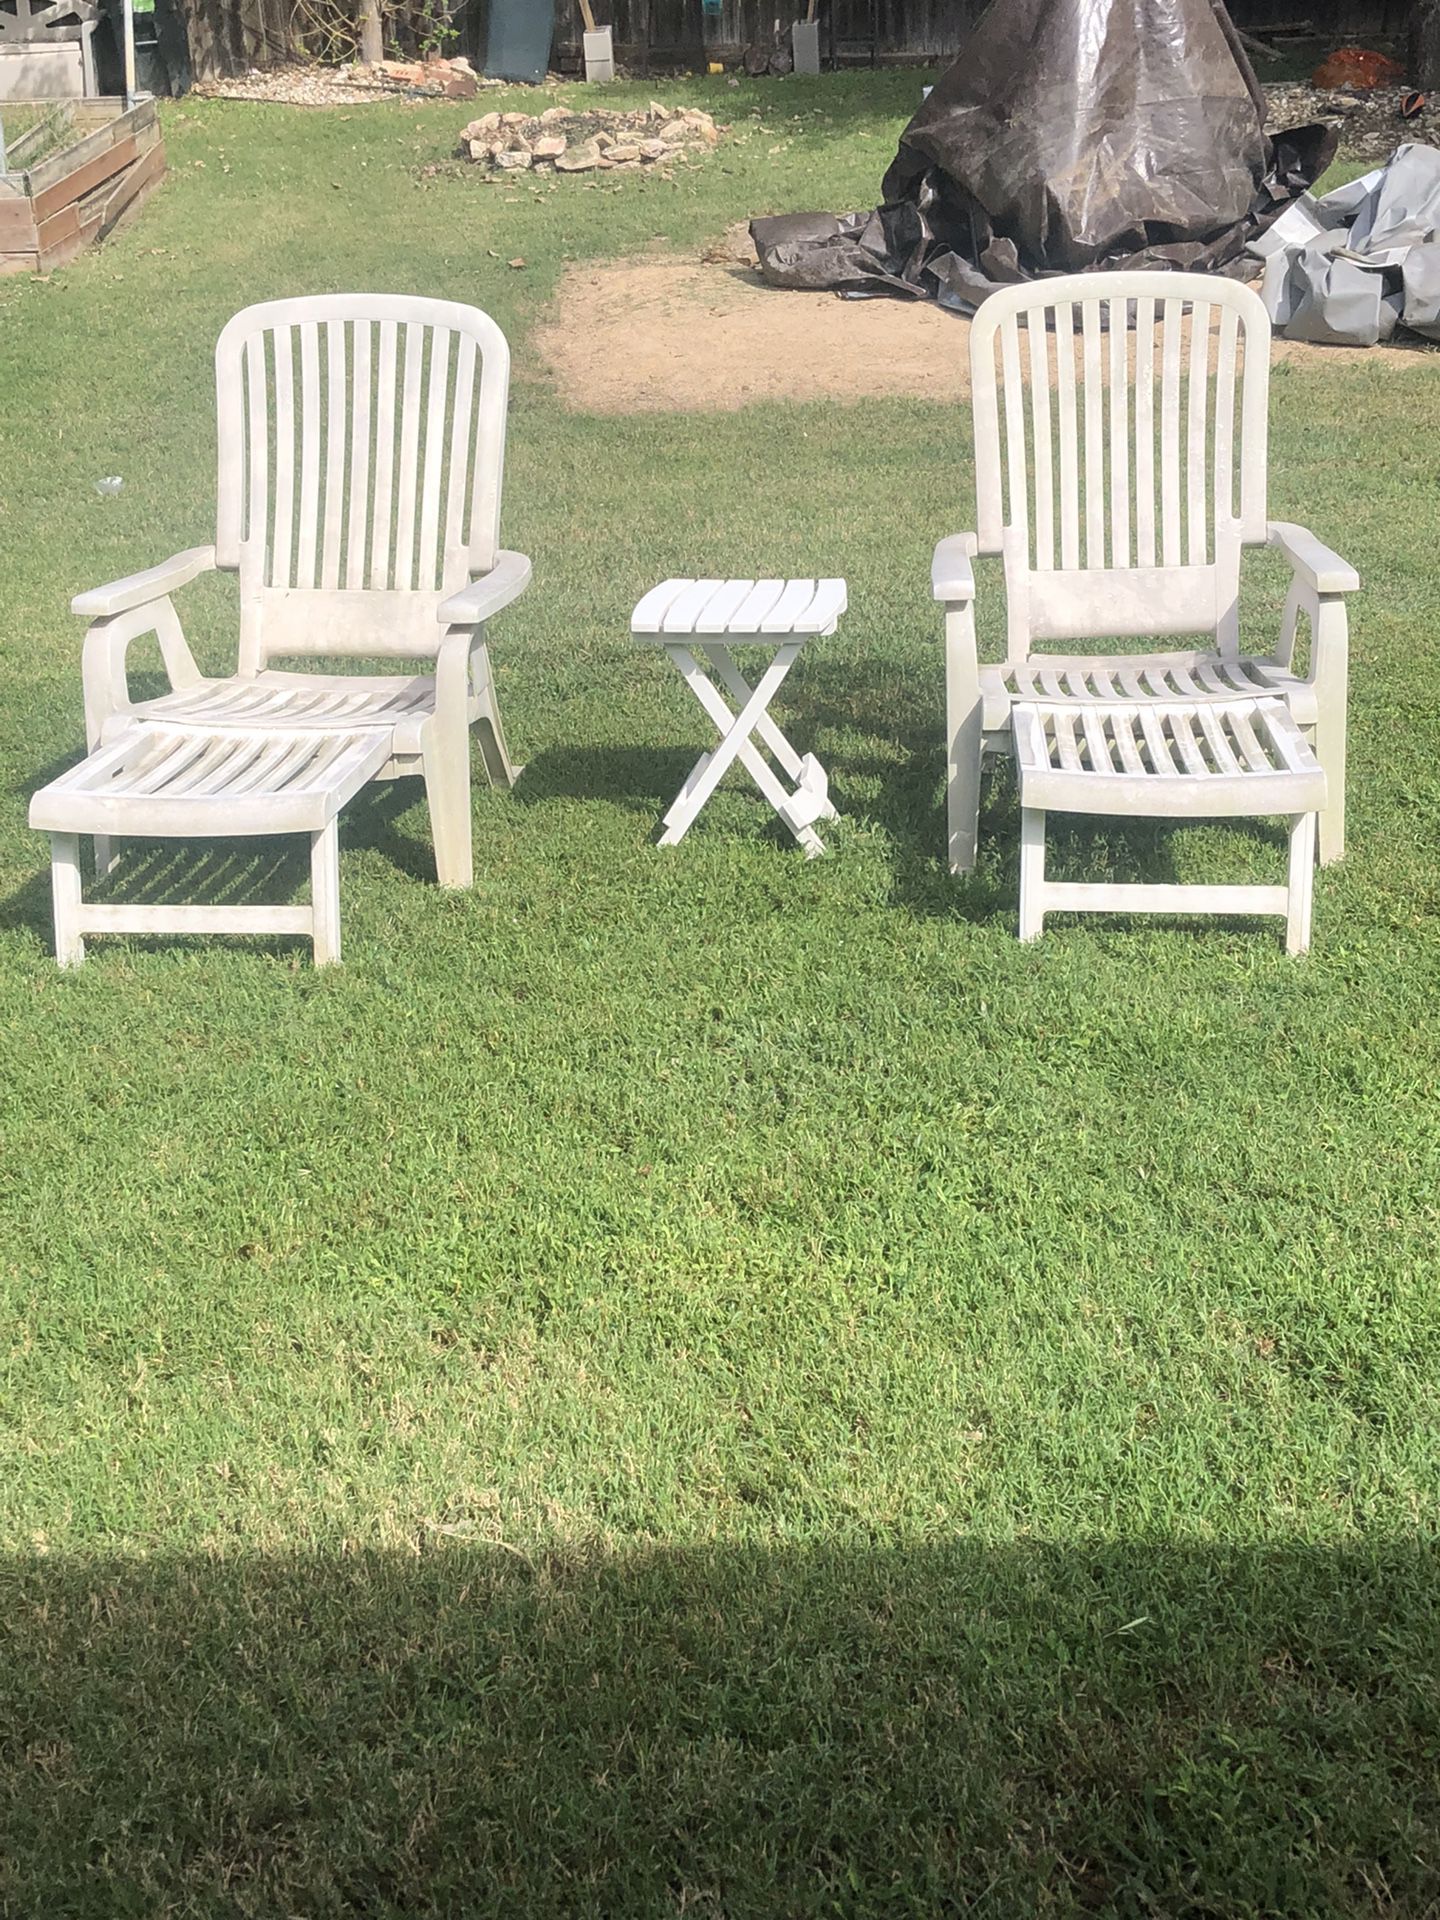 2 Lawn Chairs And Folding Table